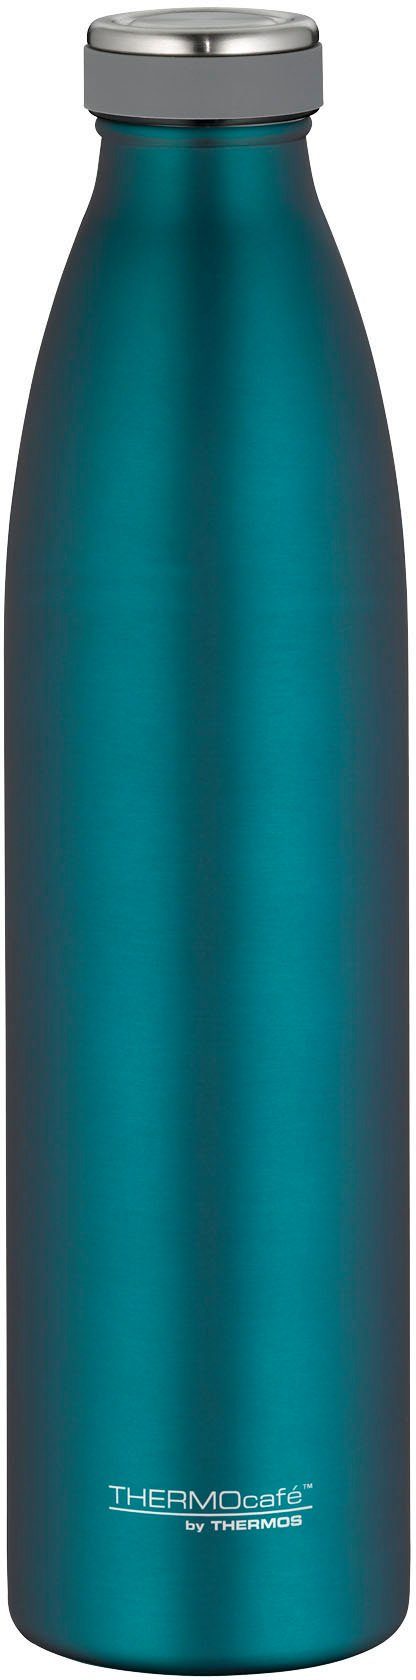 Thermoflasche petrol THERMOS Thermo Cafe